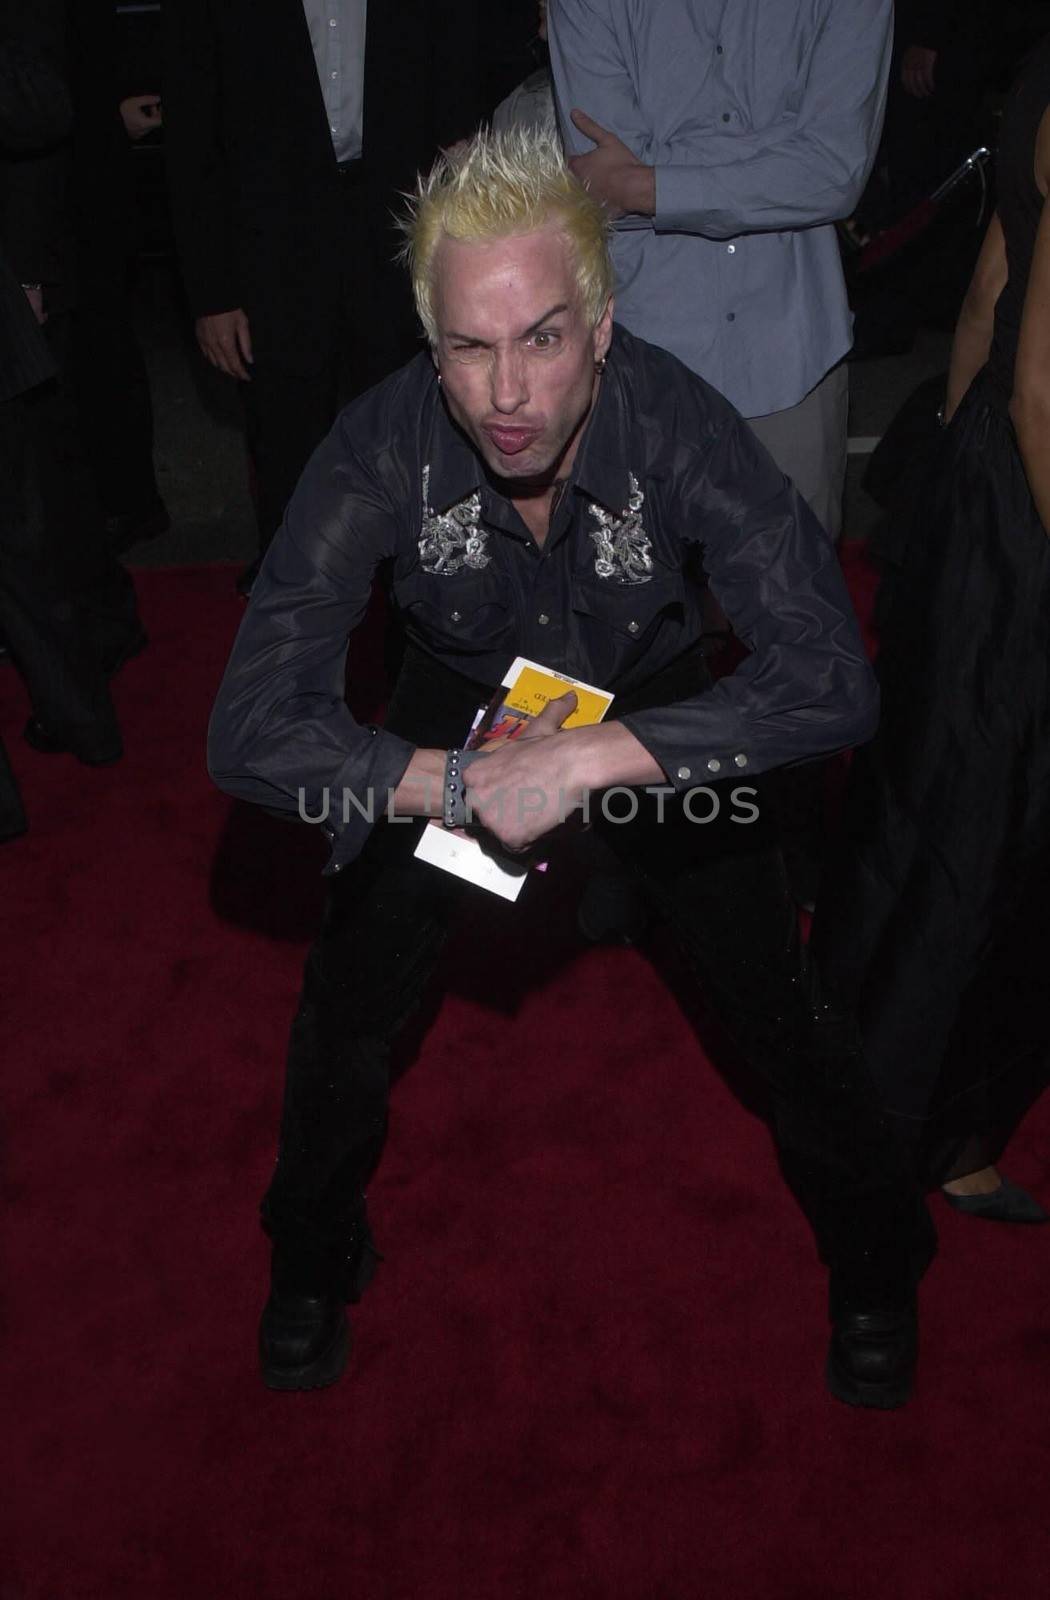 Alexis Arquette at the premiere of Warner Brother's "READY TO RUMBLE" in Hollywood, 04-05-00